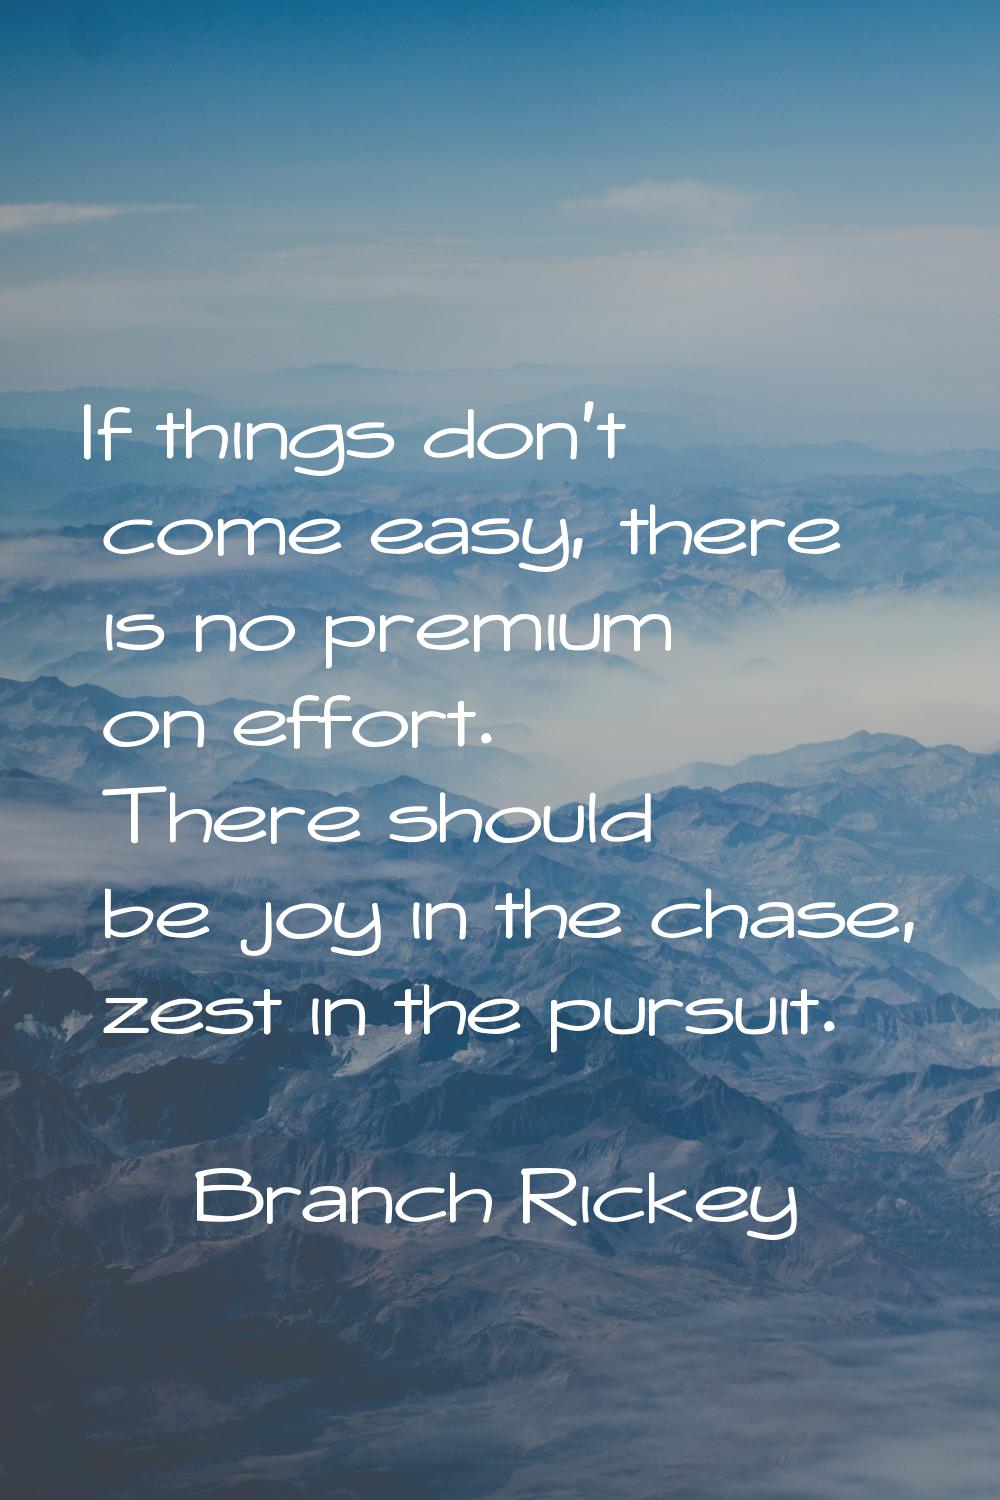 If things don't come easy, there is no premium on effort. There should be joy in the chase, zest in